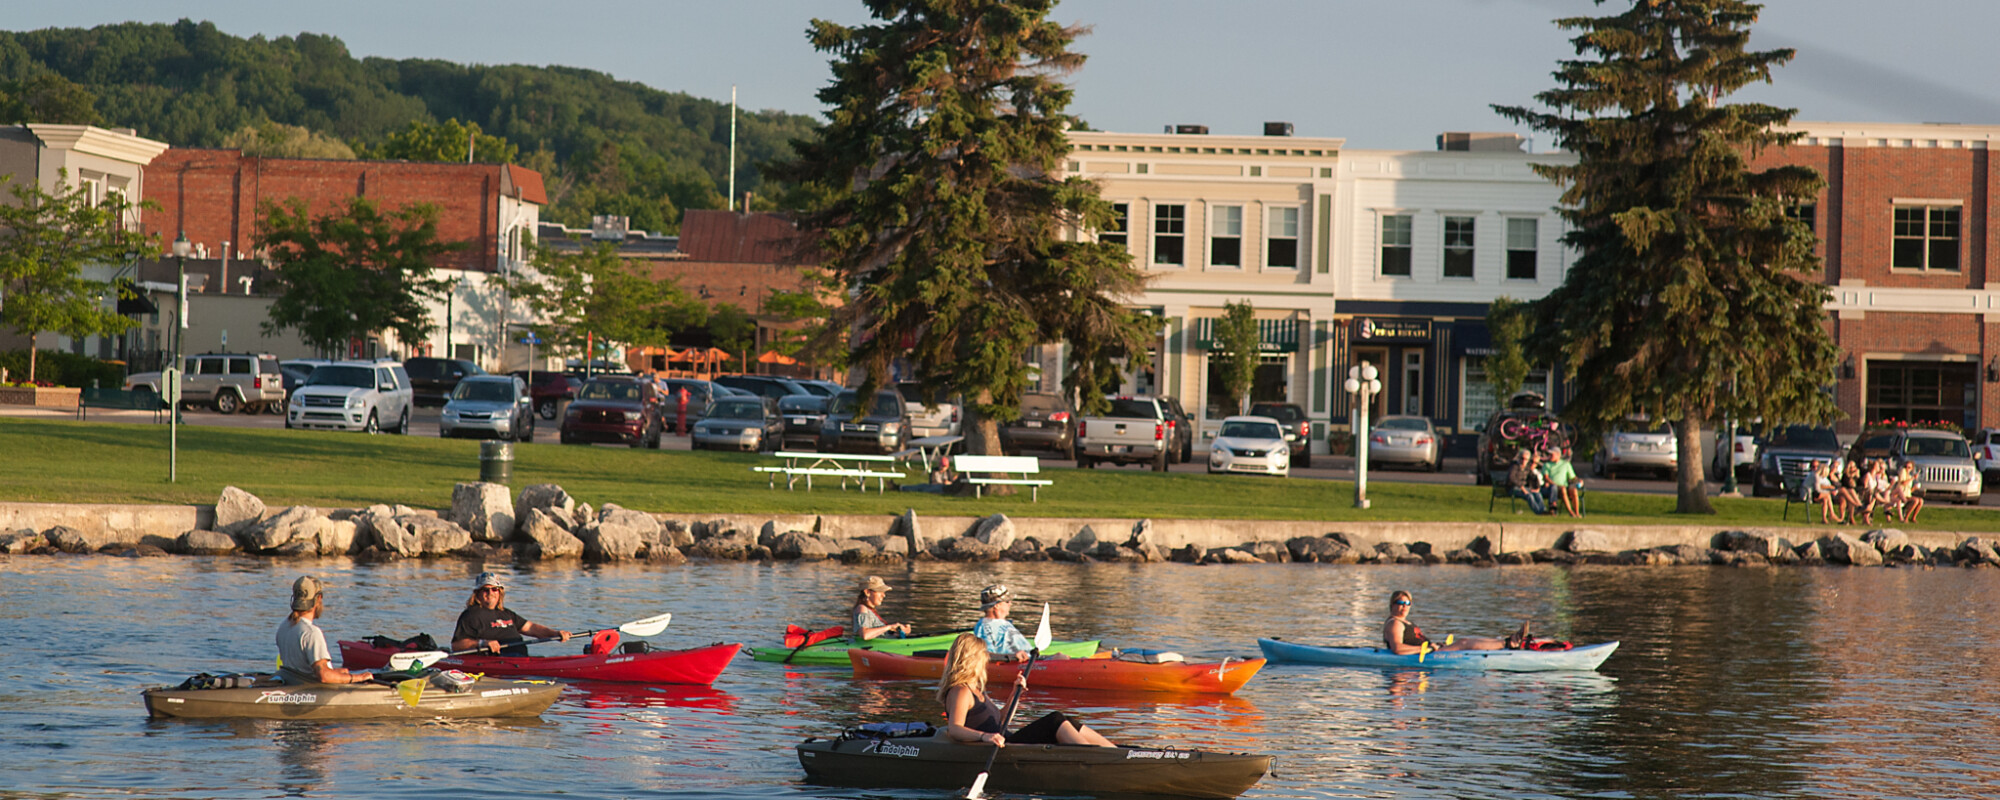 People in kayaks on a lake with historic retail storefronts in the background.